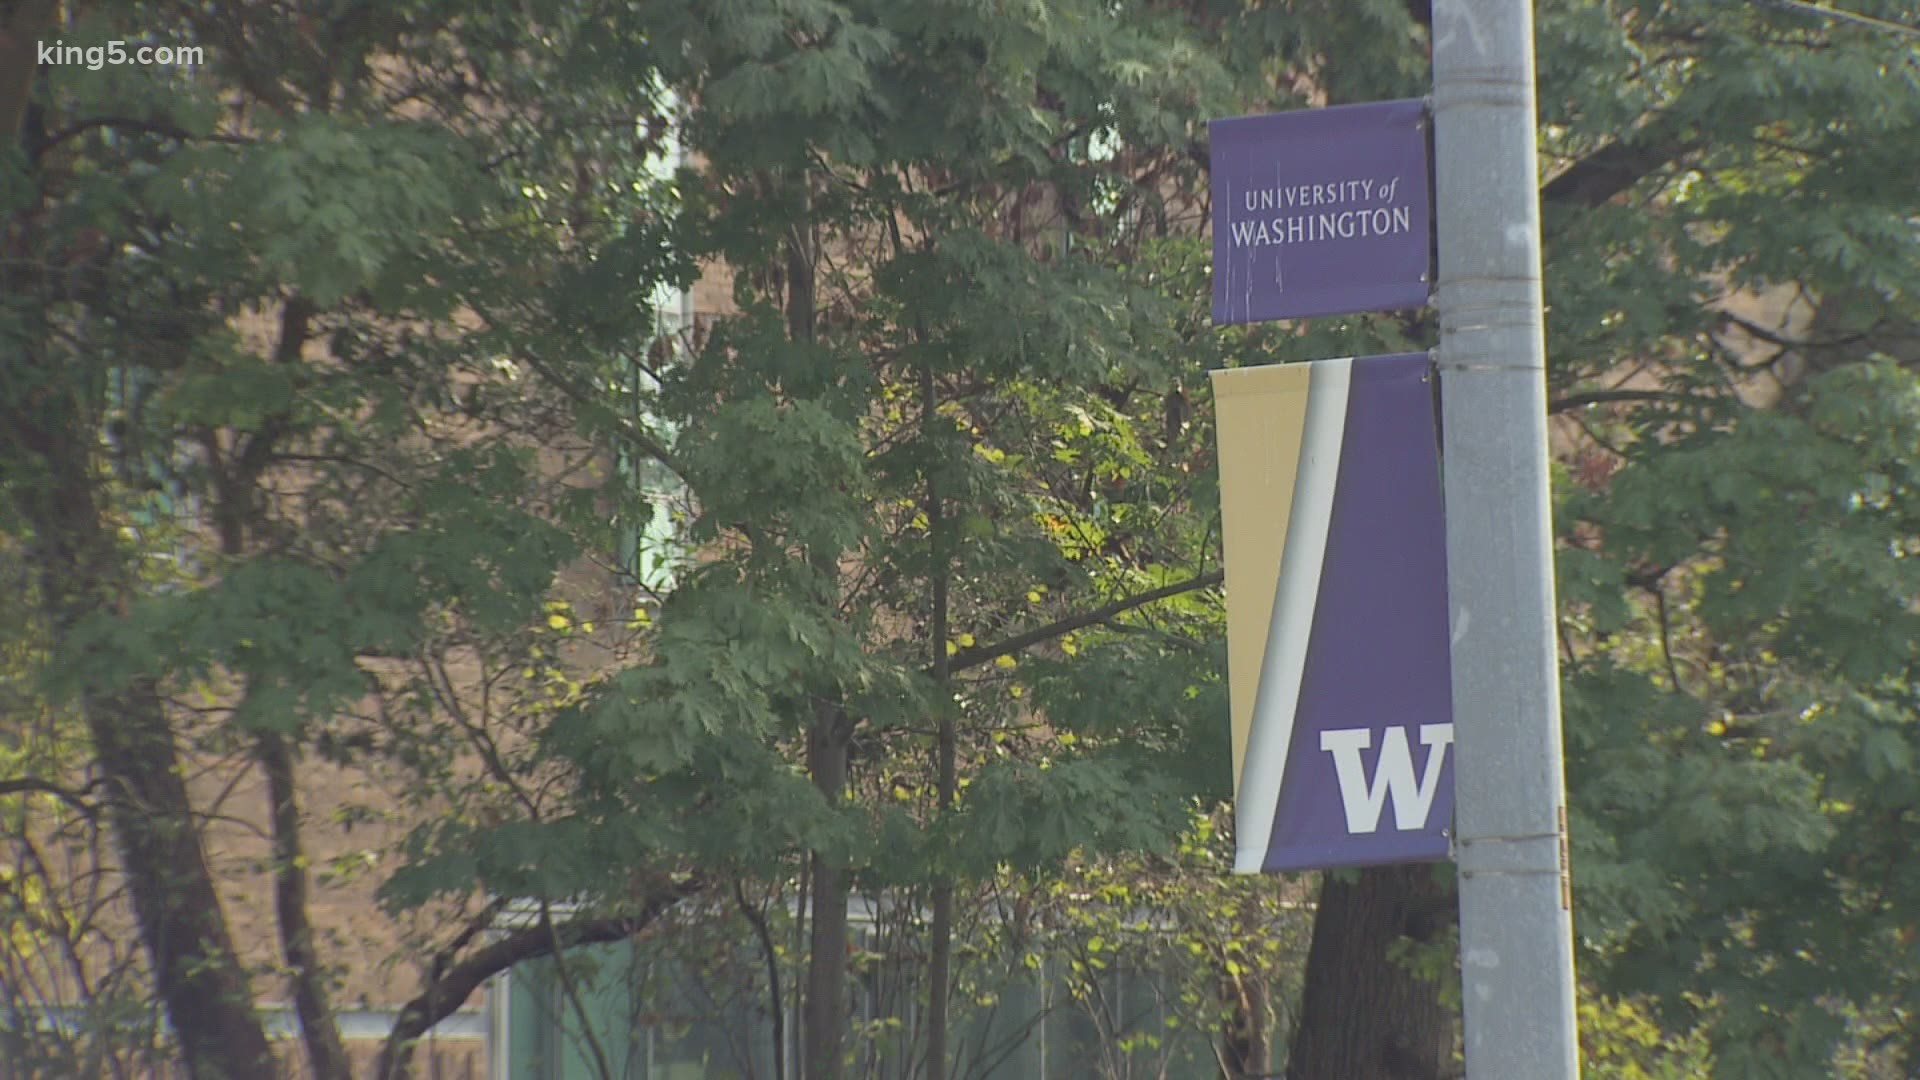 More than 200 University of Washington students in over a dozen sororities and fraternities have tested positive for COVID-19.